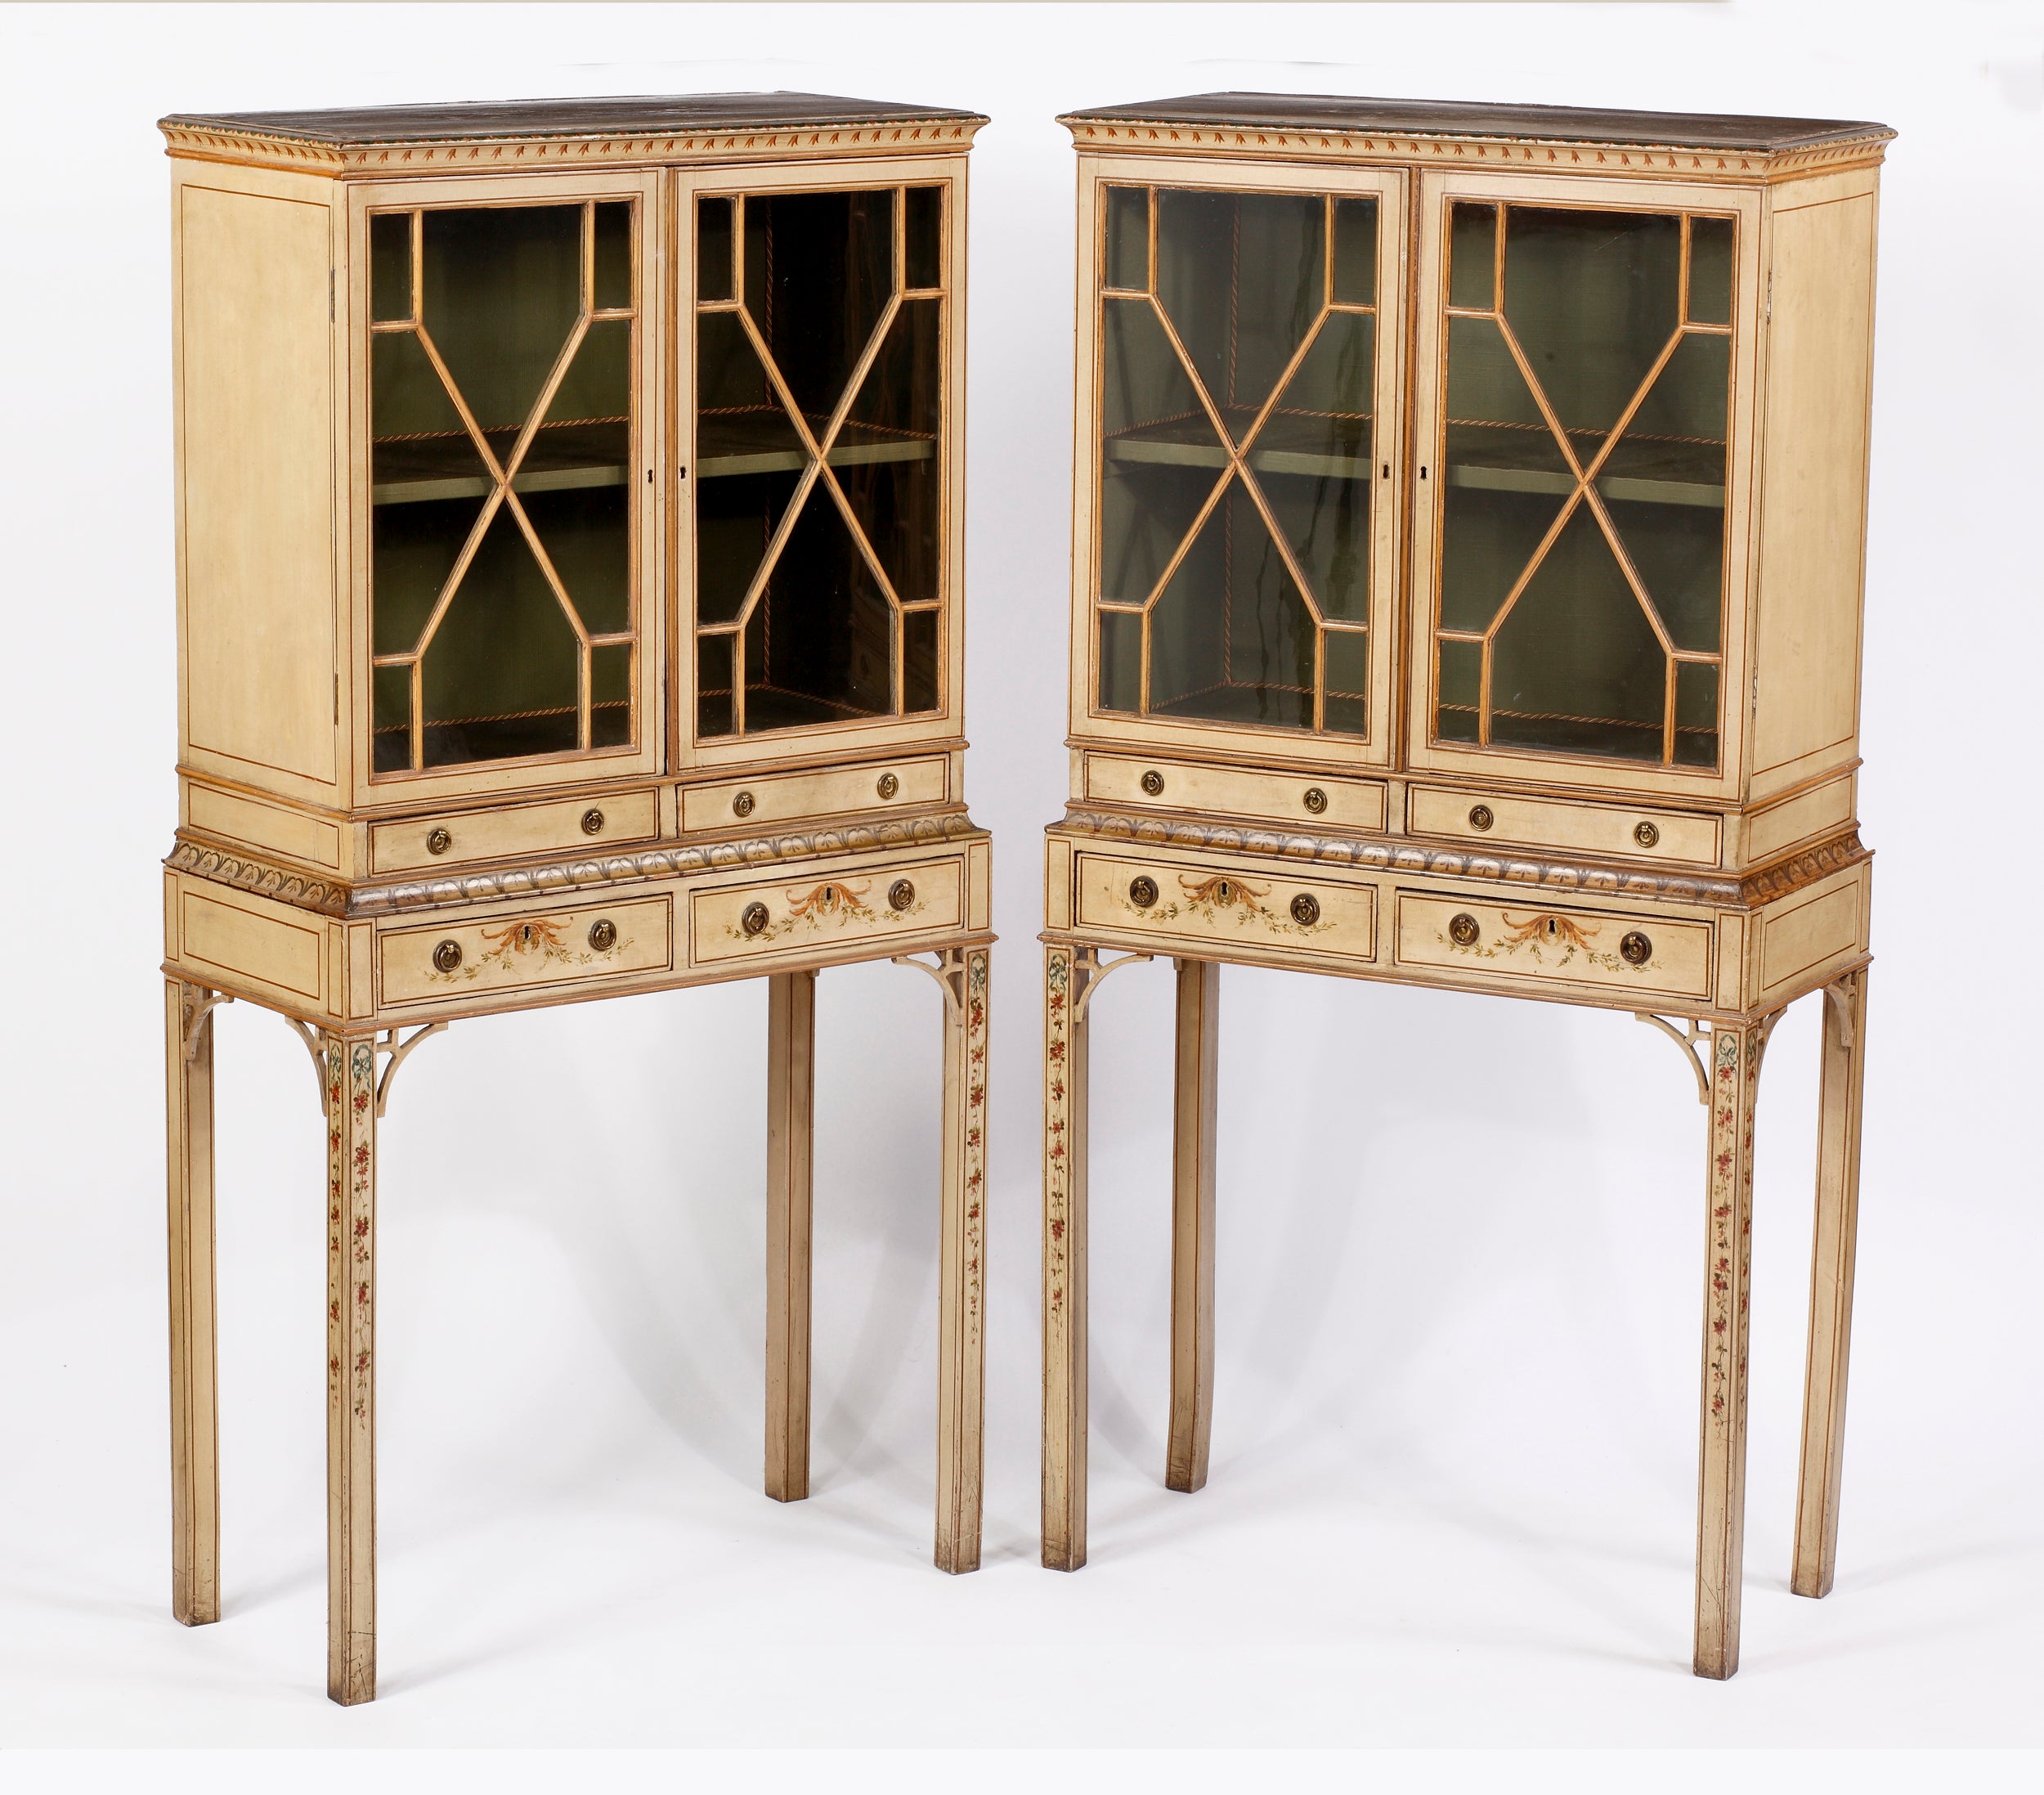 A Fine & Rare Pair of George III Painted Diminuitive Cabinets on Stands